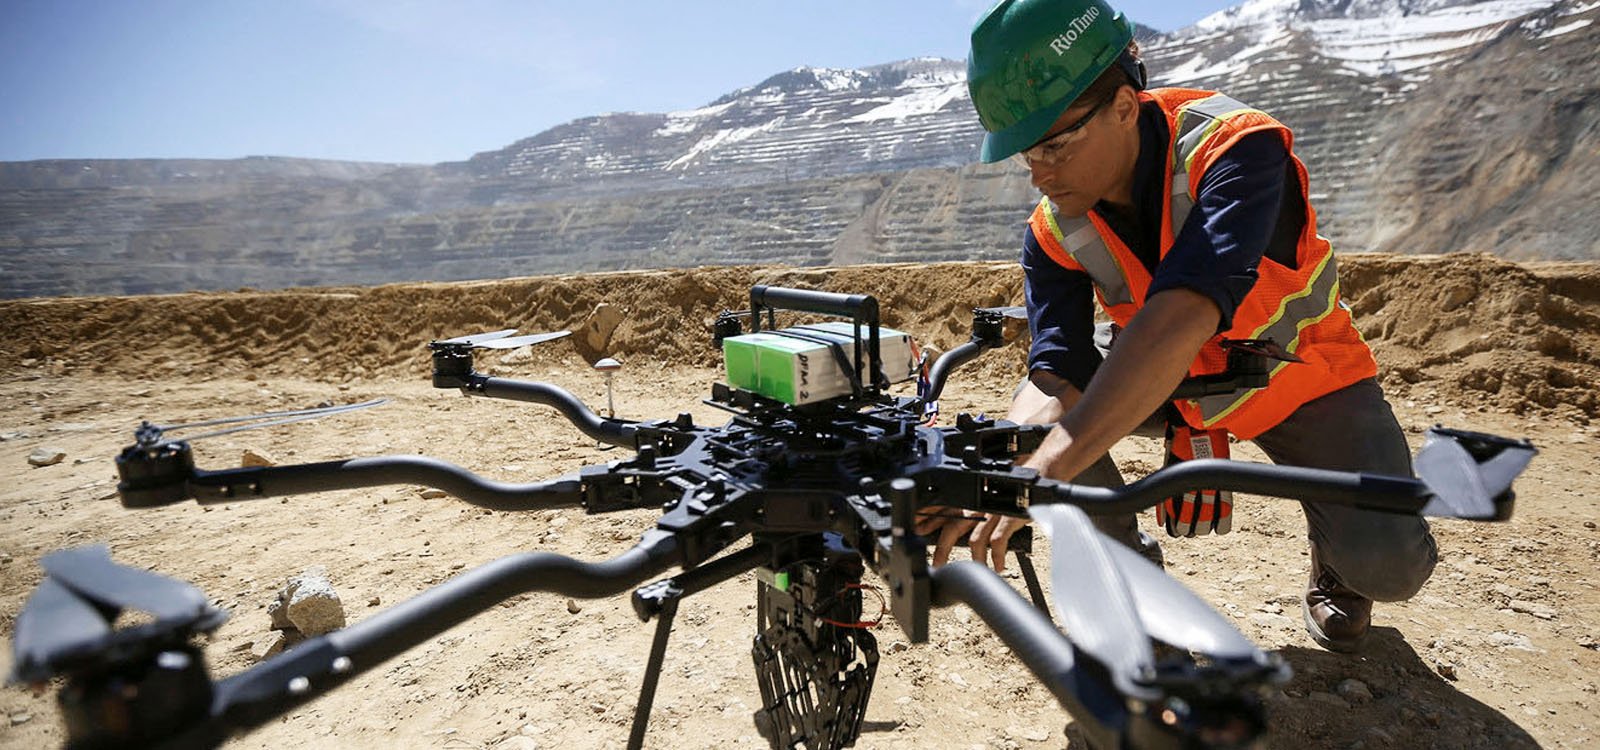 <p>Drones can go to places where people can’t and see things the human eye can’t see, offering operators vital information about the site.</p>
